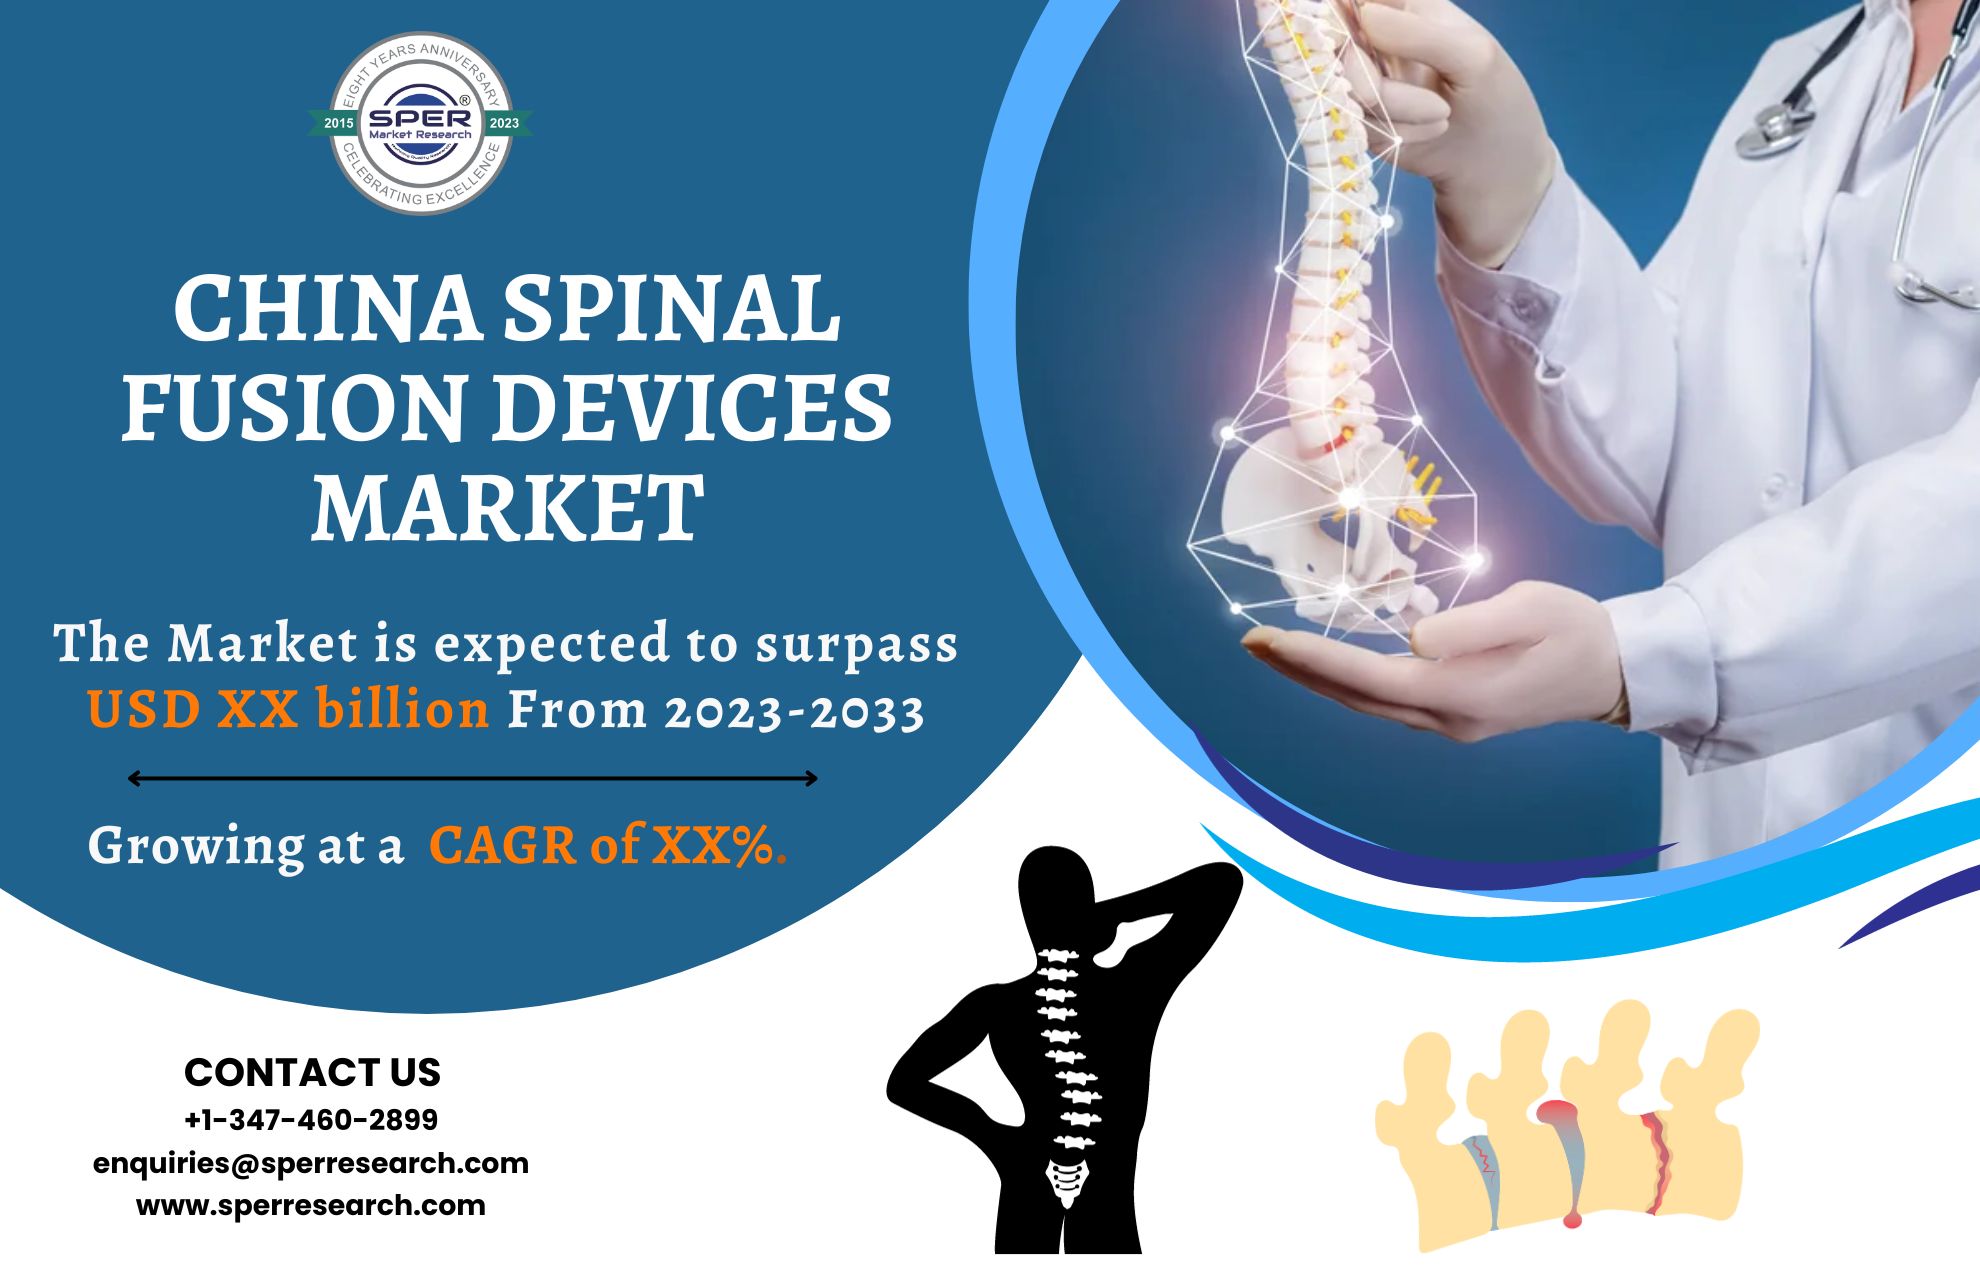 China Spinal Fusion Market Share 2023- Industry Trends, Revenue, Growth Drivers, CAGR Status, Business Opportunities and Future Competition till 2033: SPER Market Research